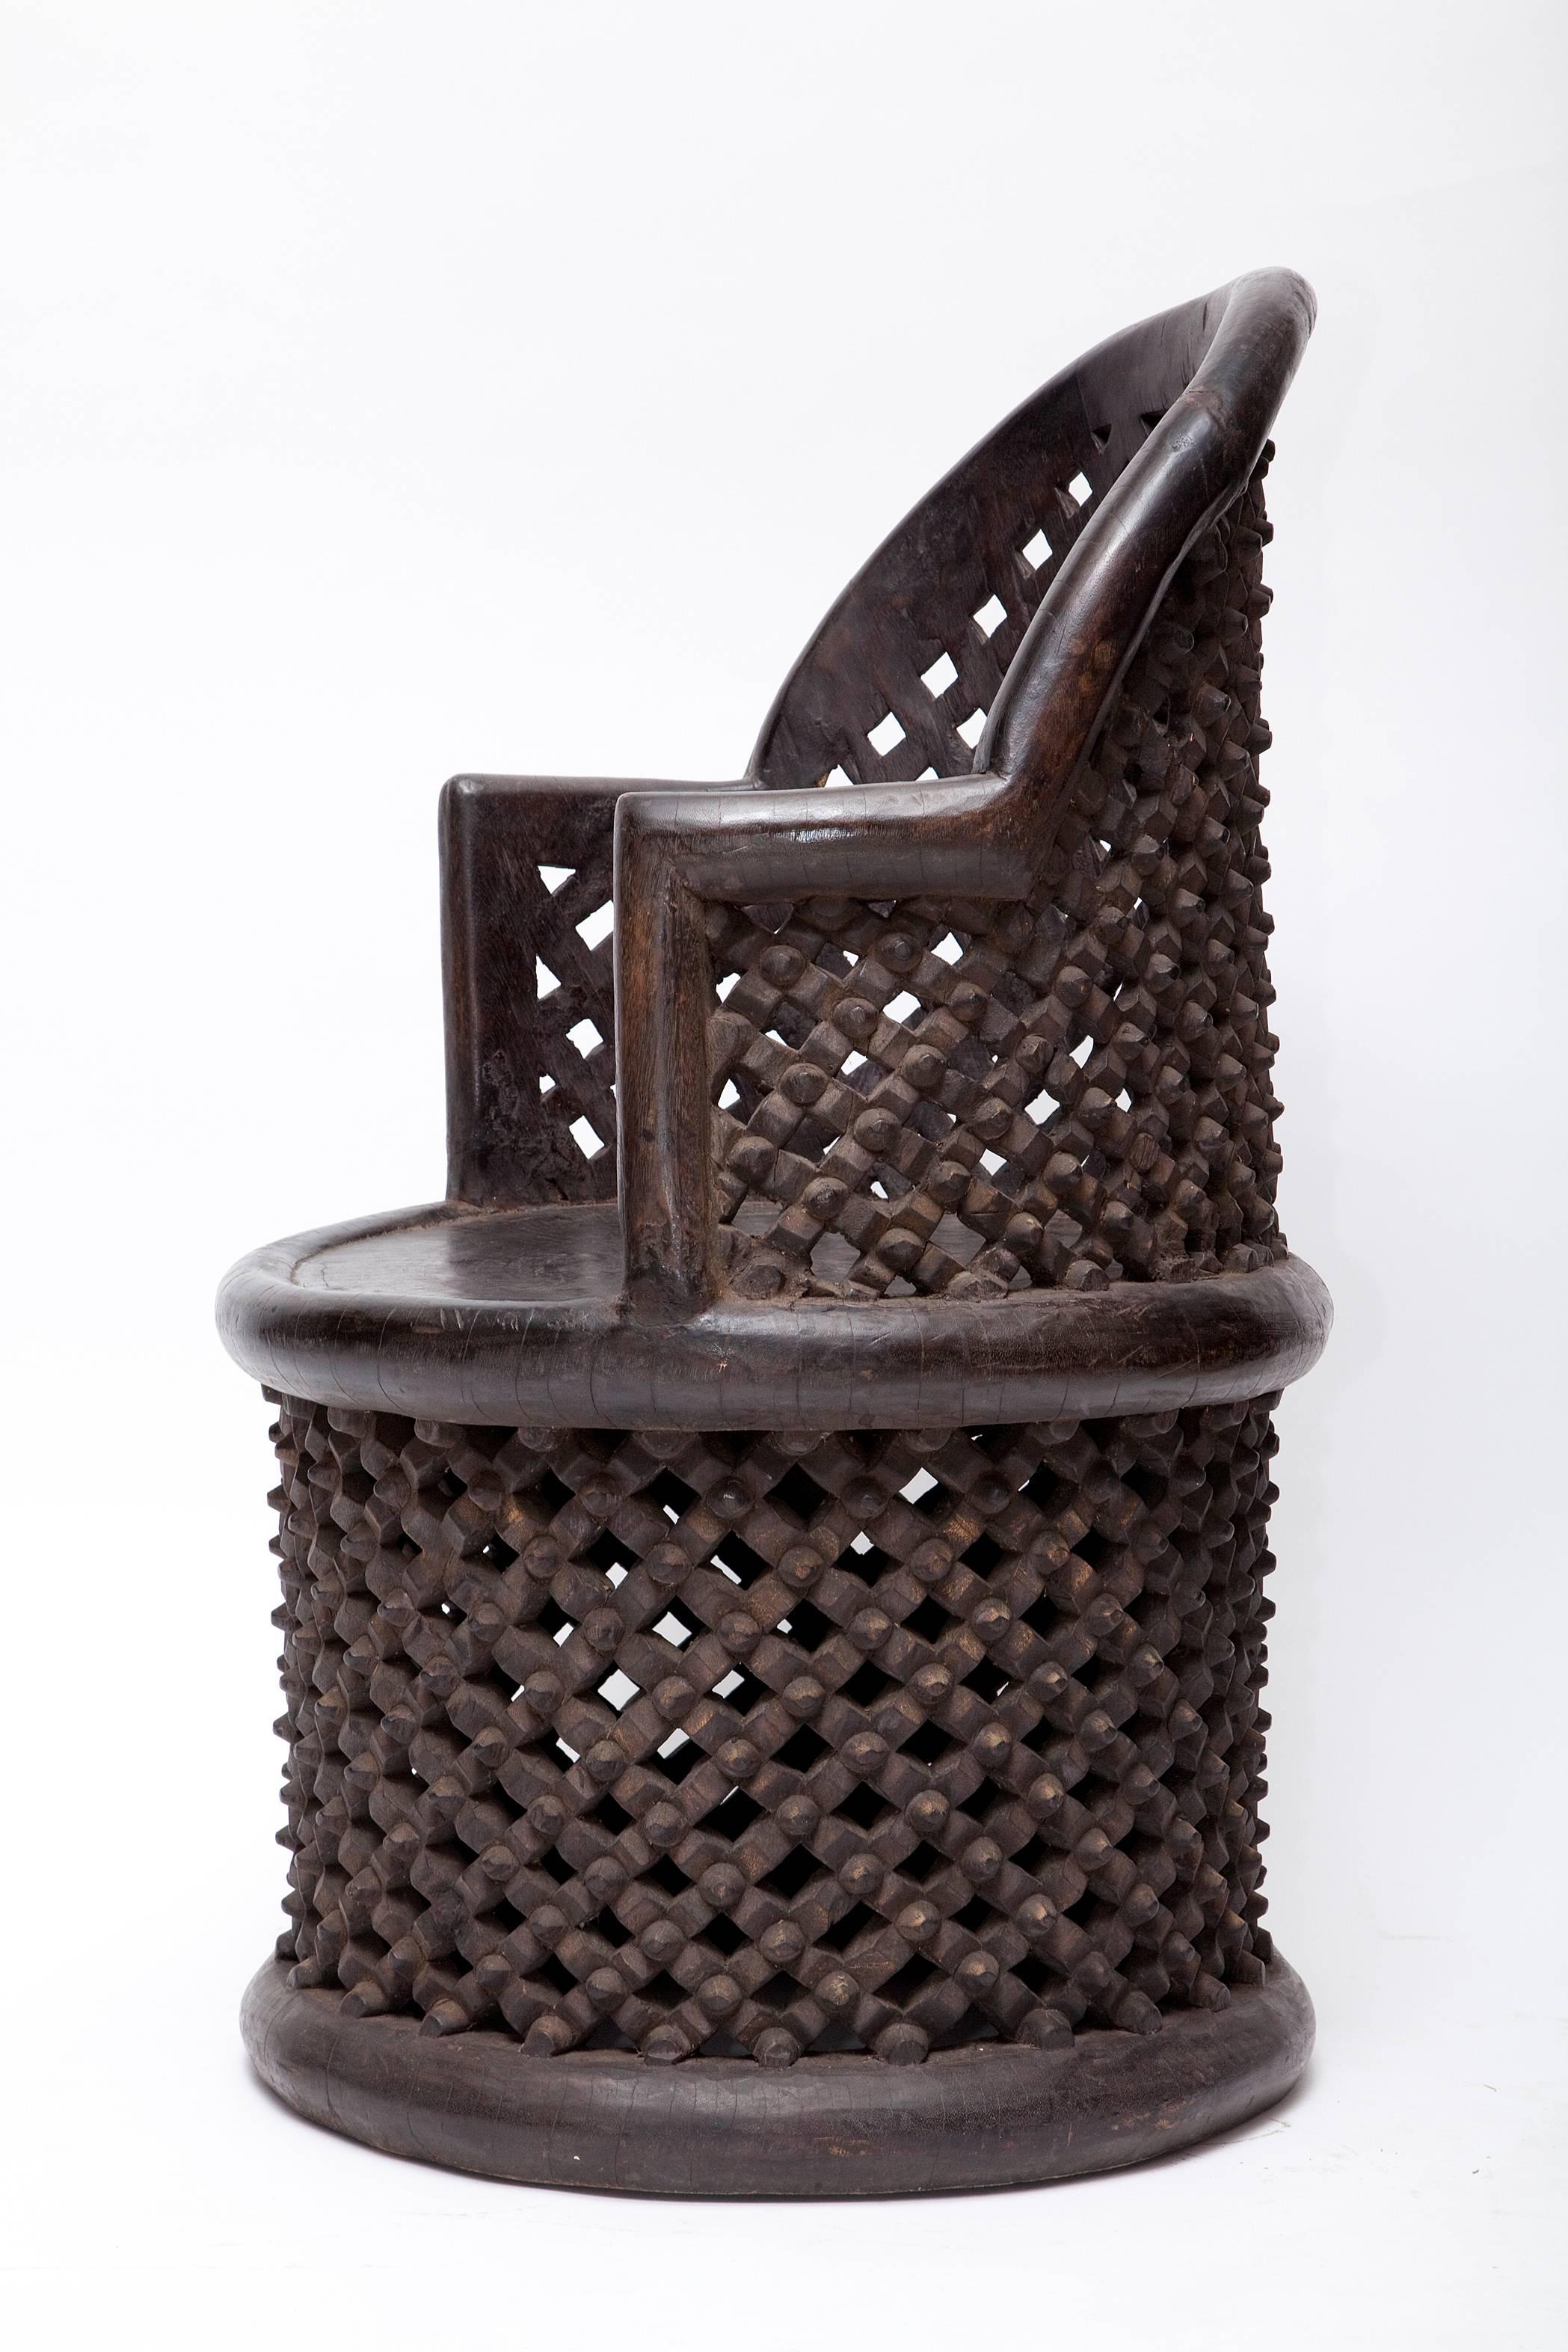 Cameroonian Bamileke Hand Carved Wood Tribal Chair - One Left!